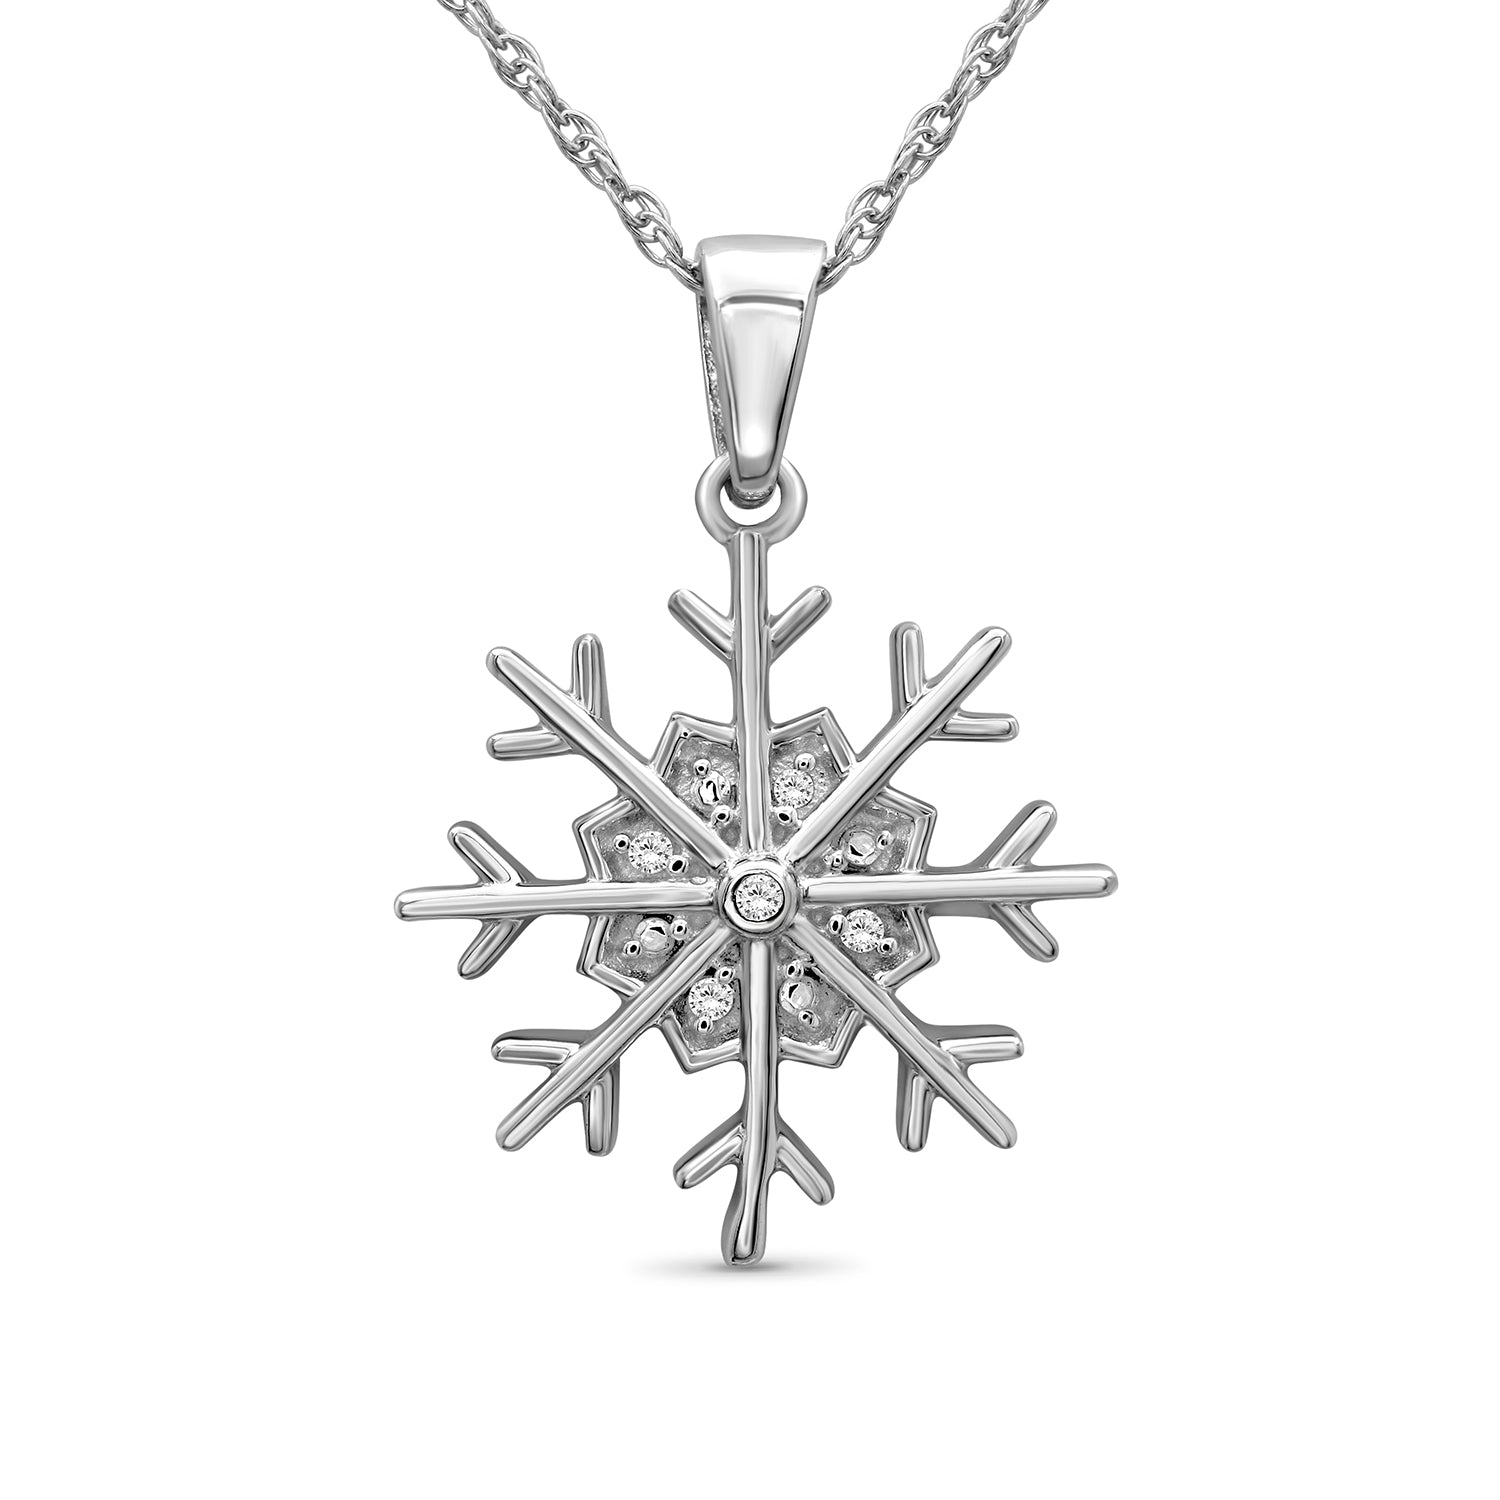 Snowflake Necklace Diamond Necklaces for Women – Genuine White Diamond, . 925 Sterling Silver Necklace Snowflake – Christmas Gifts for Women – Silver Diamond Pendant Necklace for Women